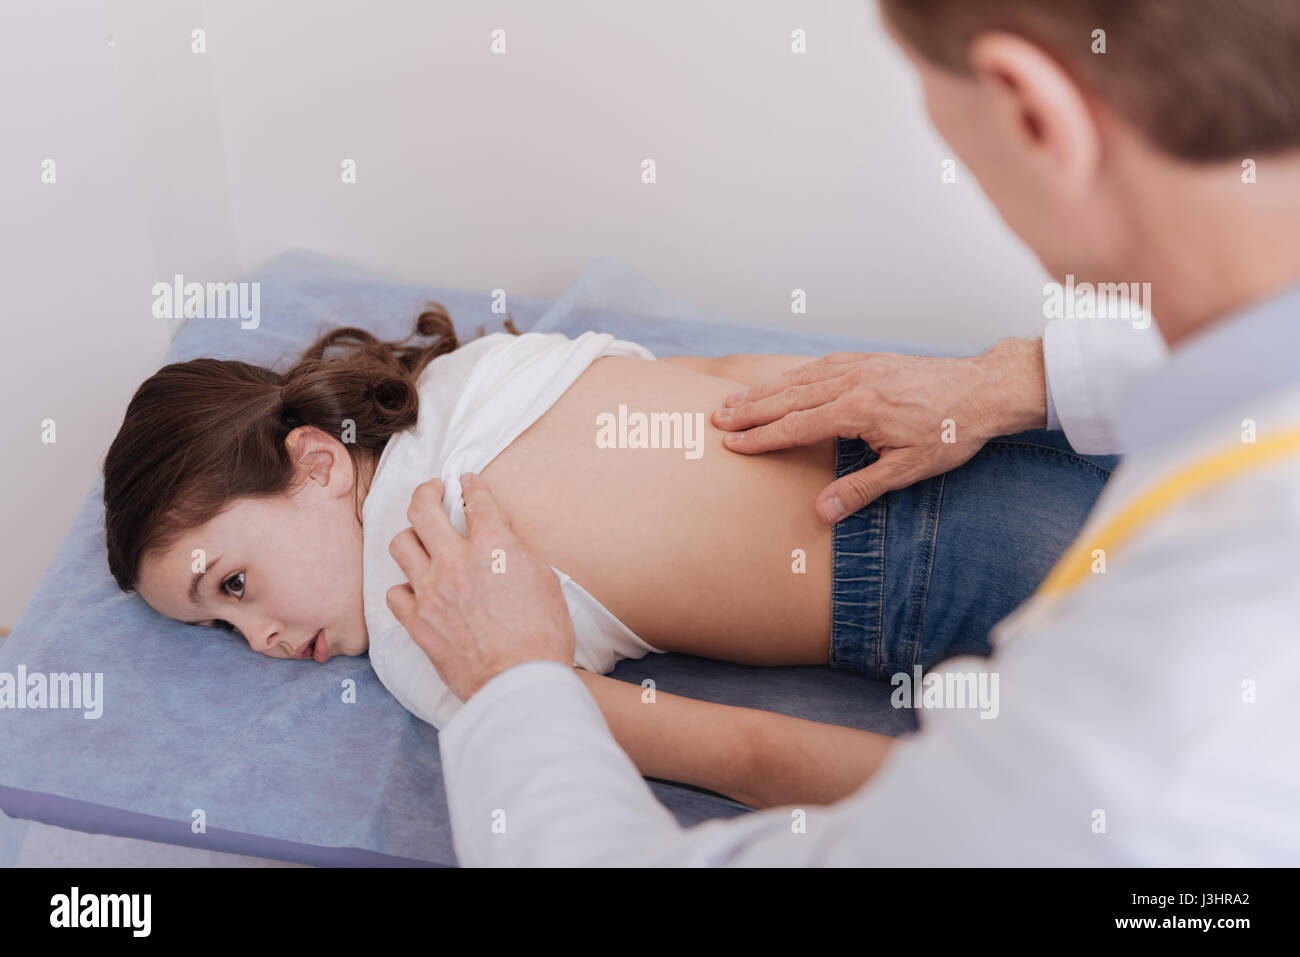 Does it hurt. Professional capable gentle rheumatologist examining the spine of the child while she experiencing pain and needing professional treatme Stock Photo